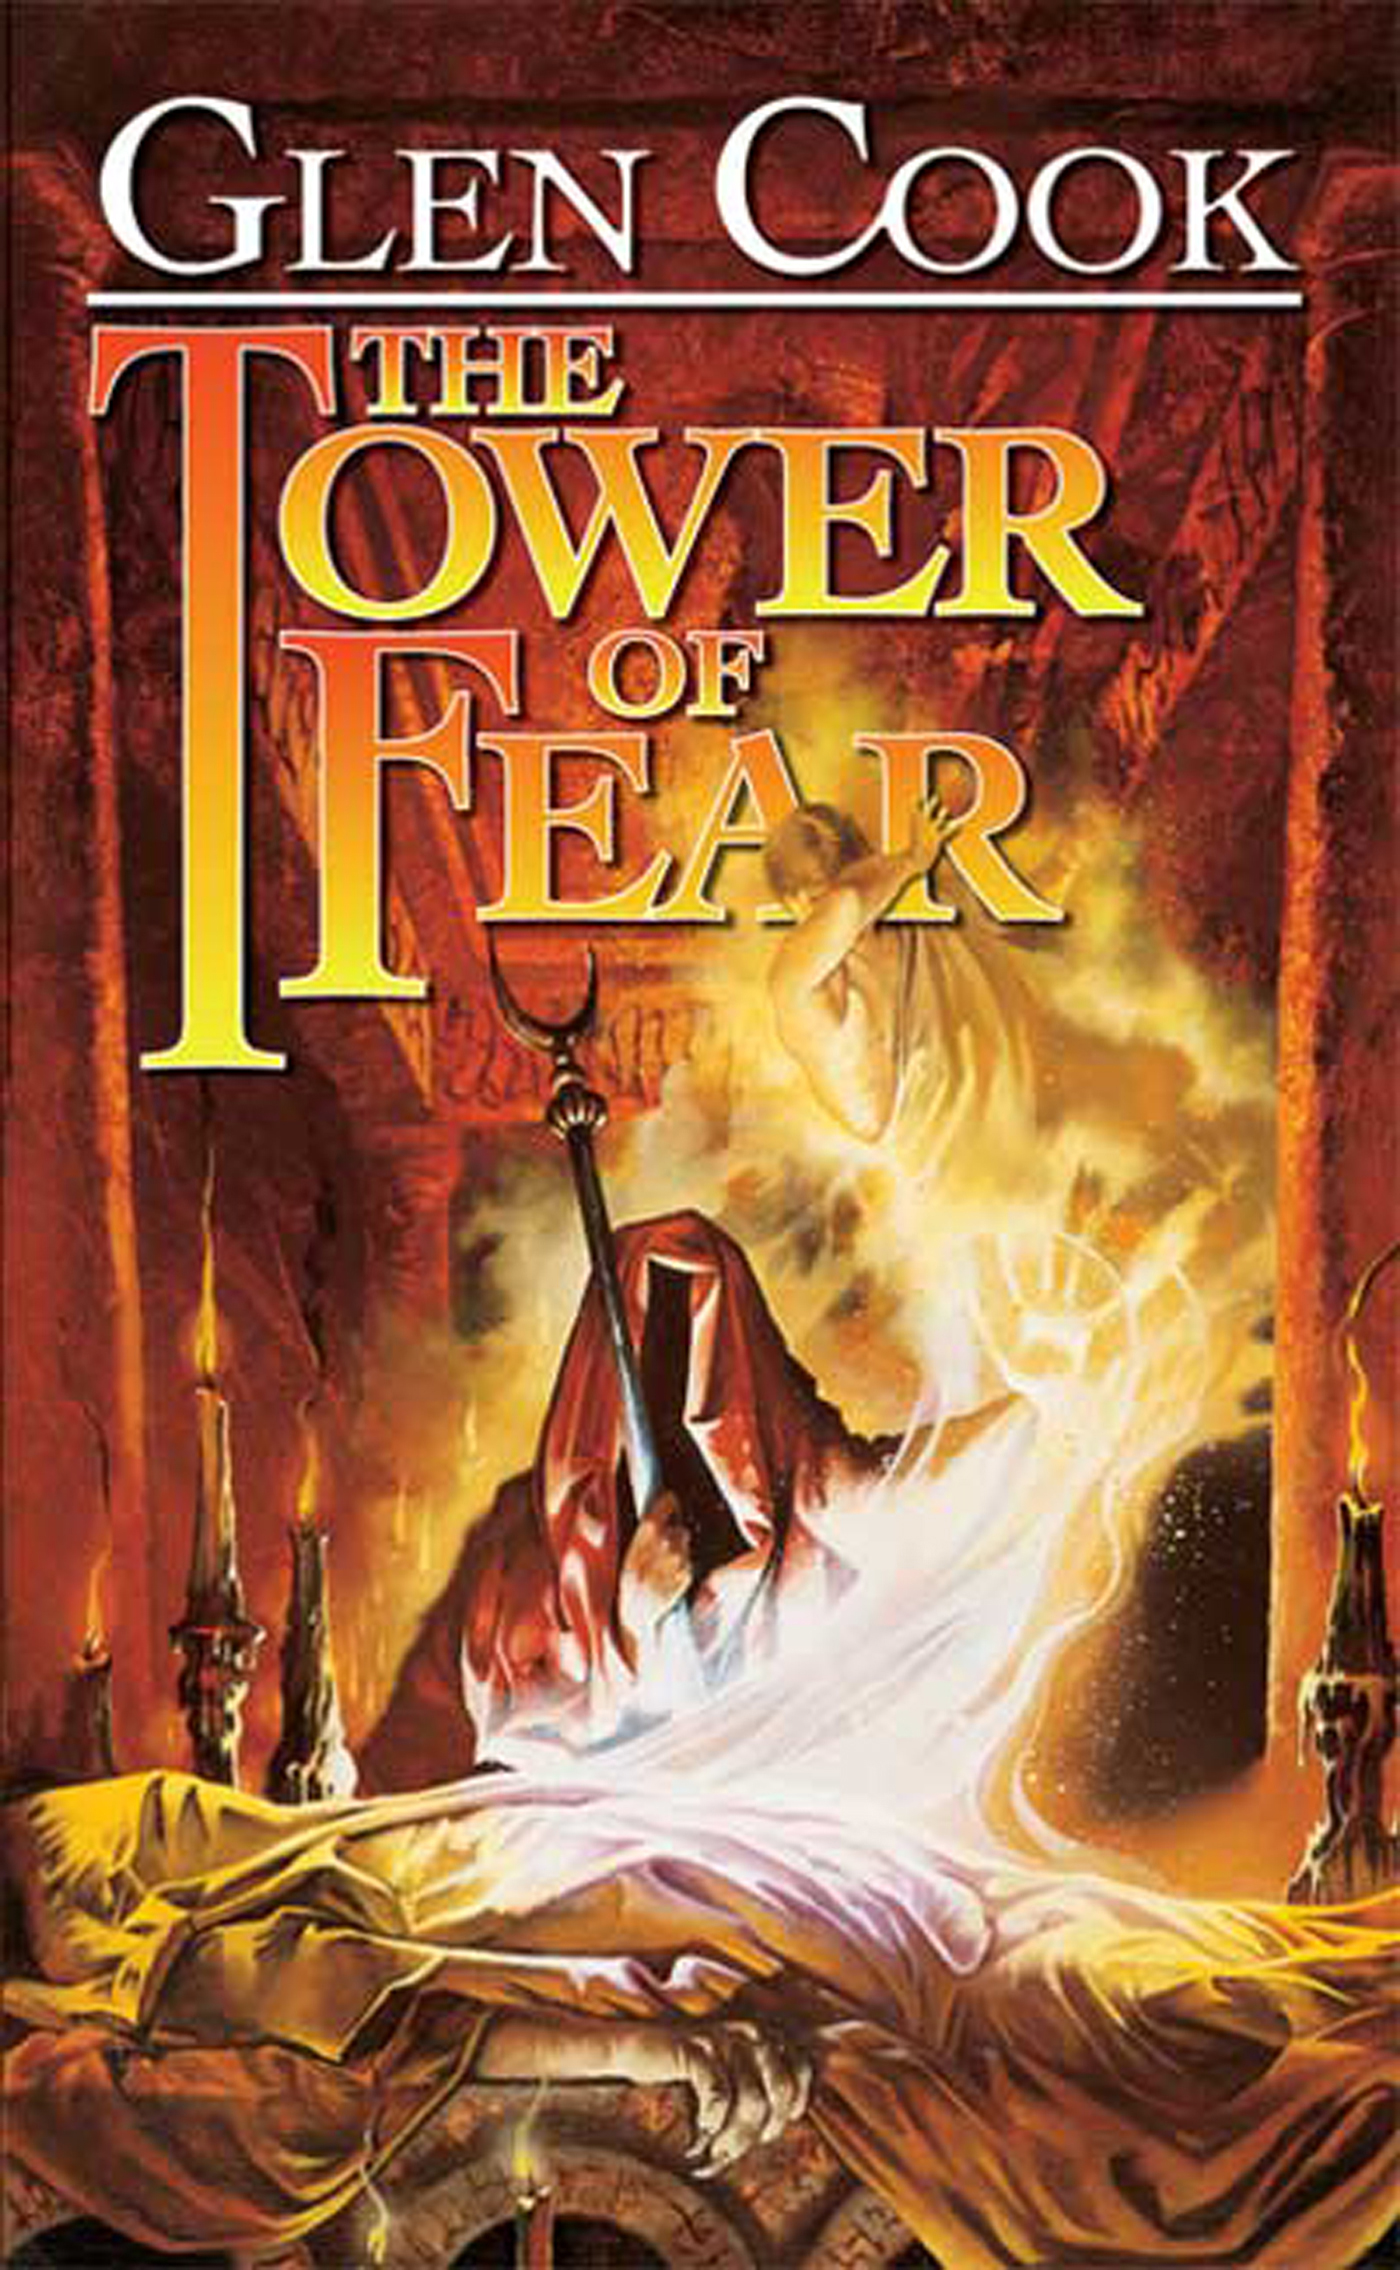 The Tower of Fear by Glen Cook